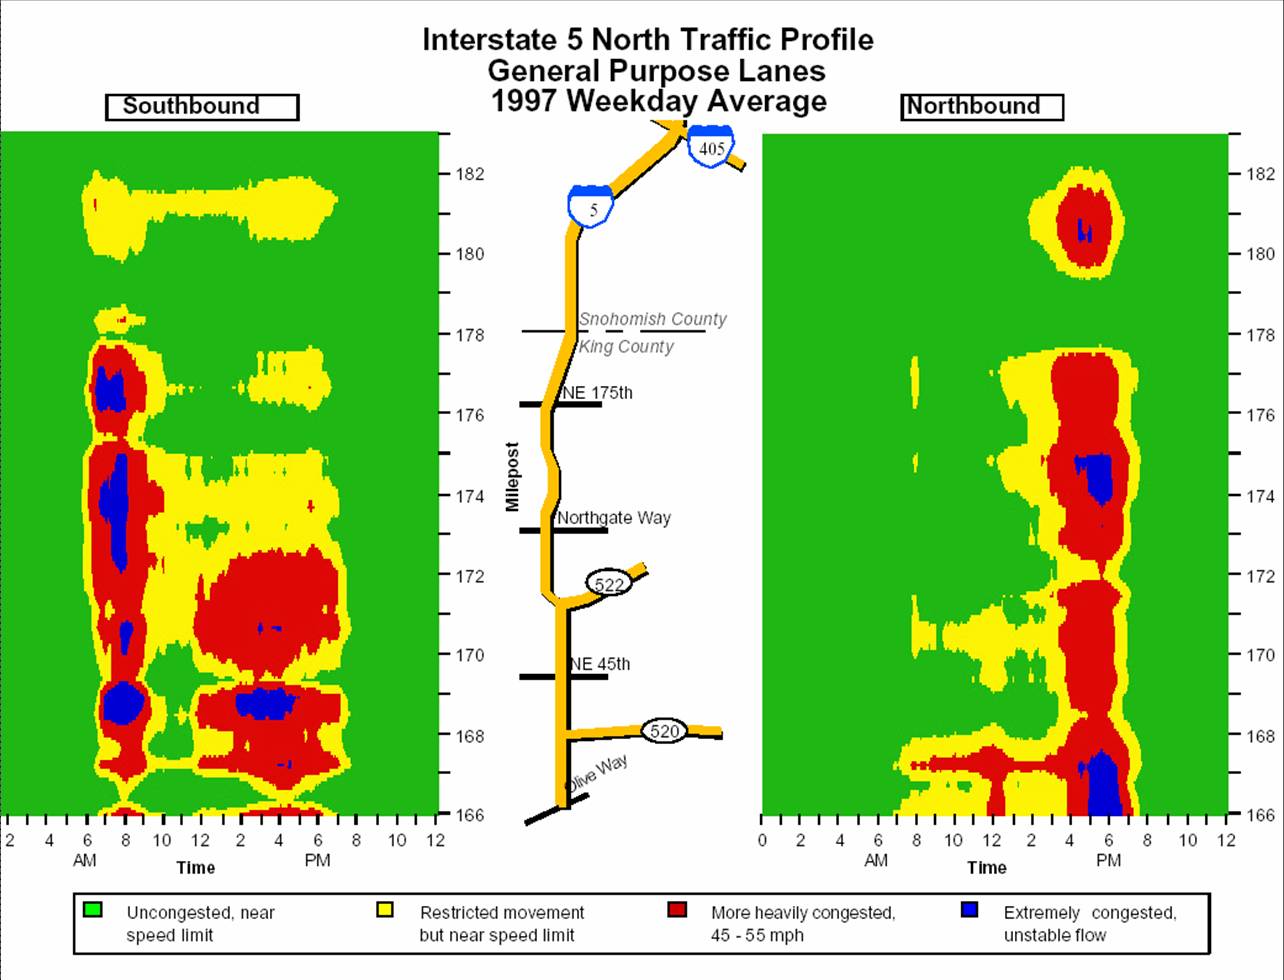 This figure is a graphic of the congestion level along I-5 in King and Snohomish Counties in Washington state.  The graphics are for both Southbound and Northbound directions of the freeway.  The congestion levels are distributed laterally along the length of the roadway and distributed over the time of day.  The dark areas are the heaviest congetsion levels.  This type of graphic makes it clear where and when the congestion is located and is a good tool for performing alternative analysis.